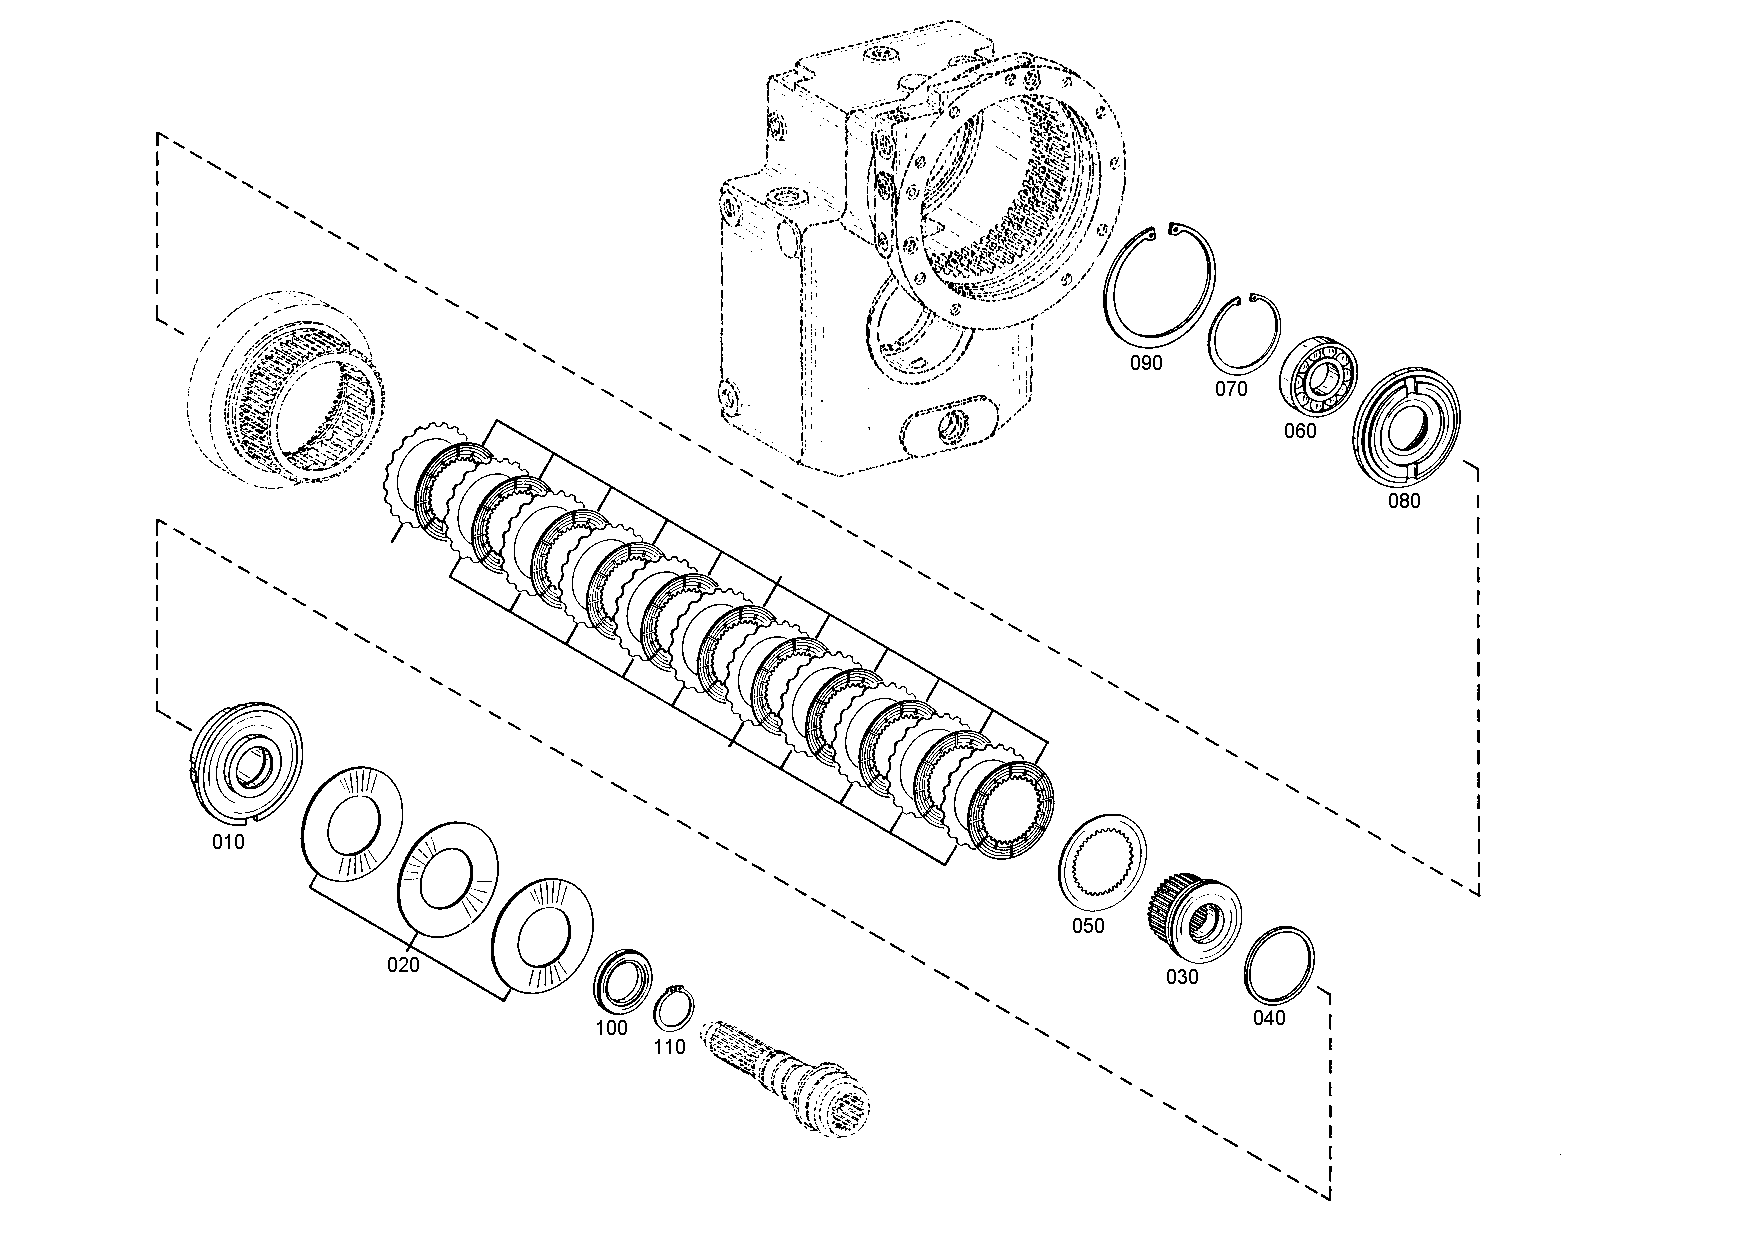 drawing for BUCHER FRANZ GMBH 7015916 - CUP SPRING (figure 2)